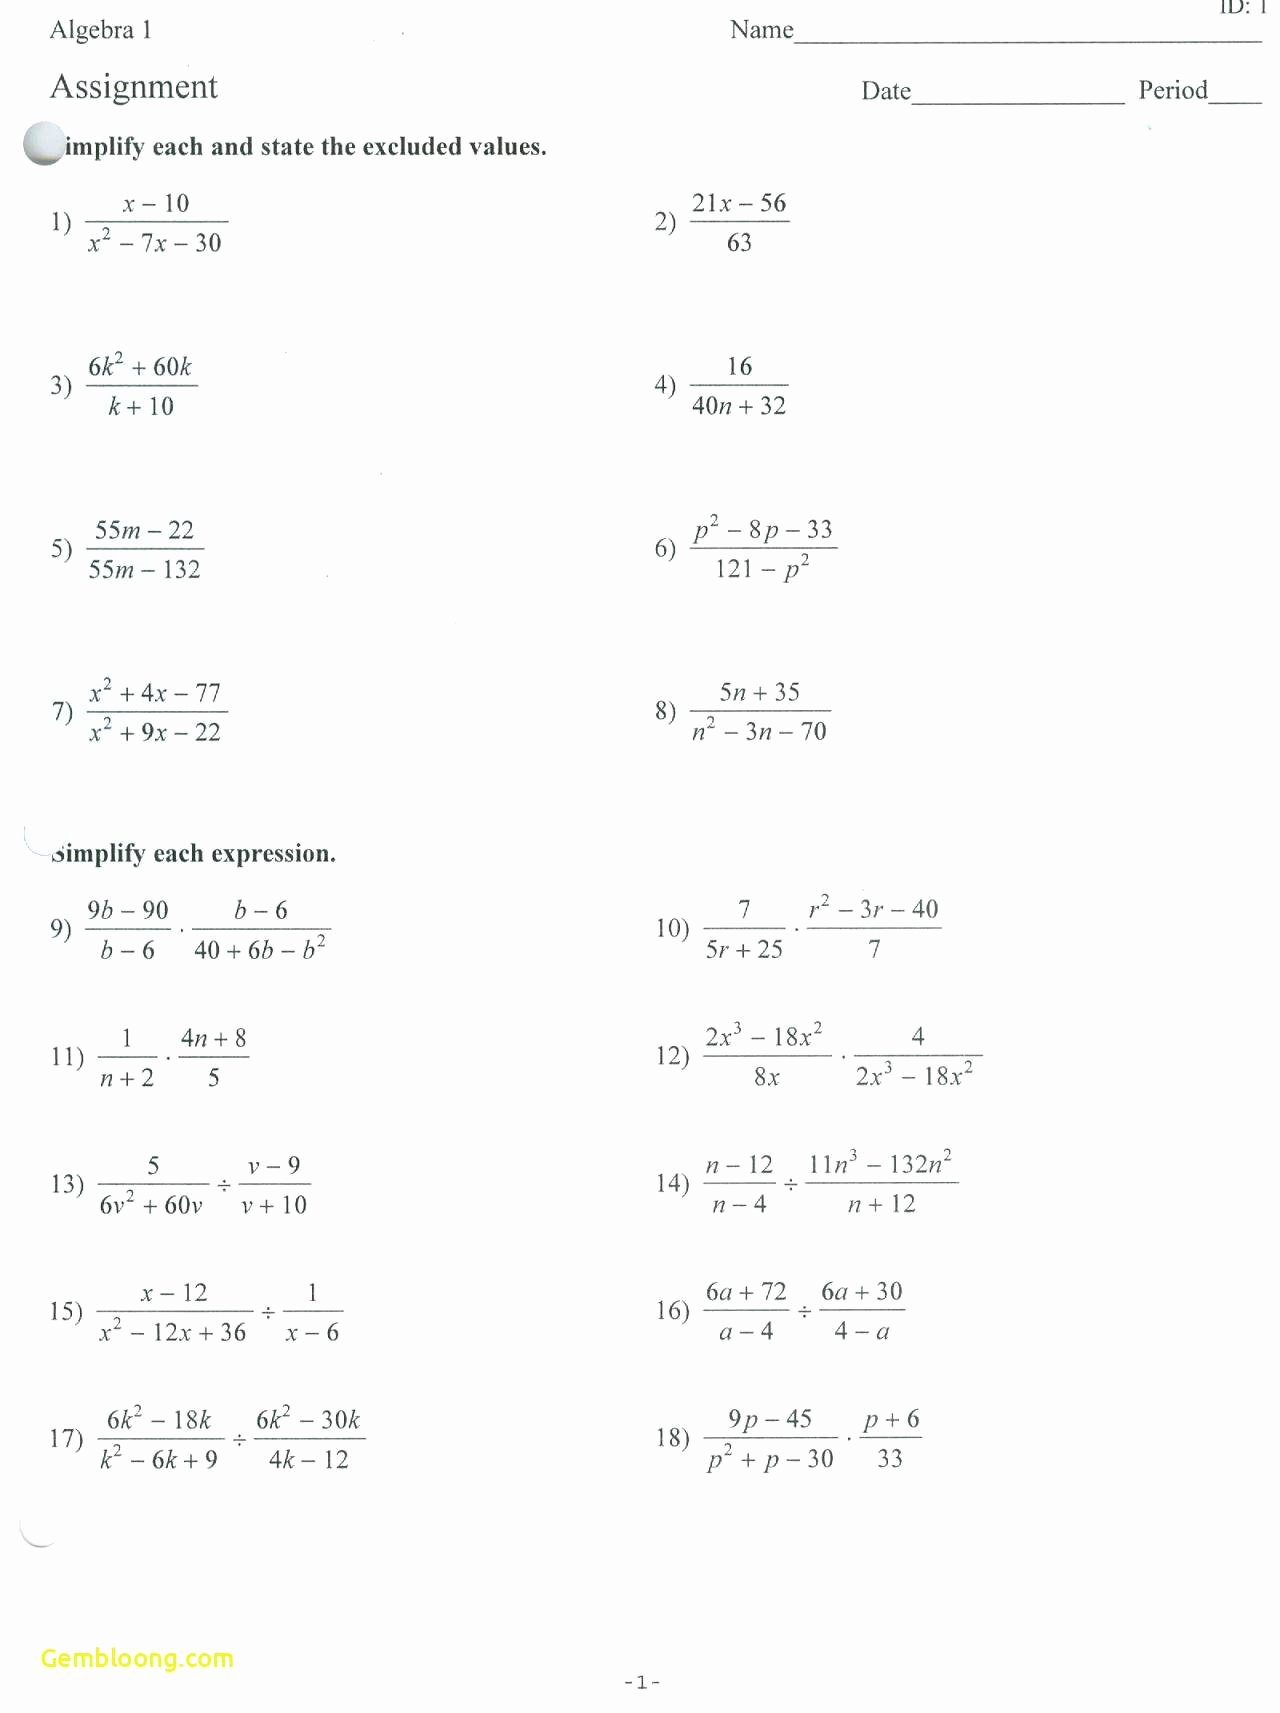 Graphing Quadratics Review Worksheet Awesome Graphing Quadratics Review Worksheet Answers